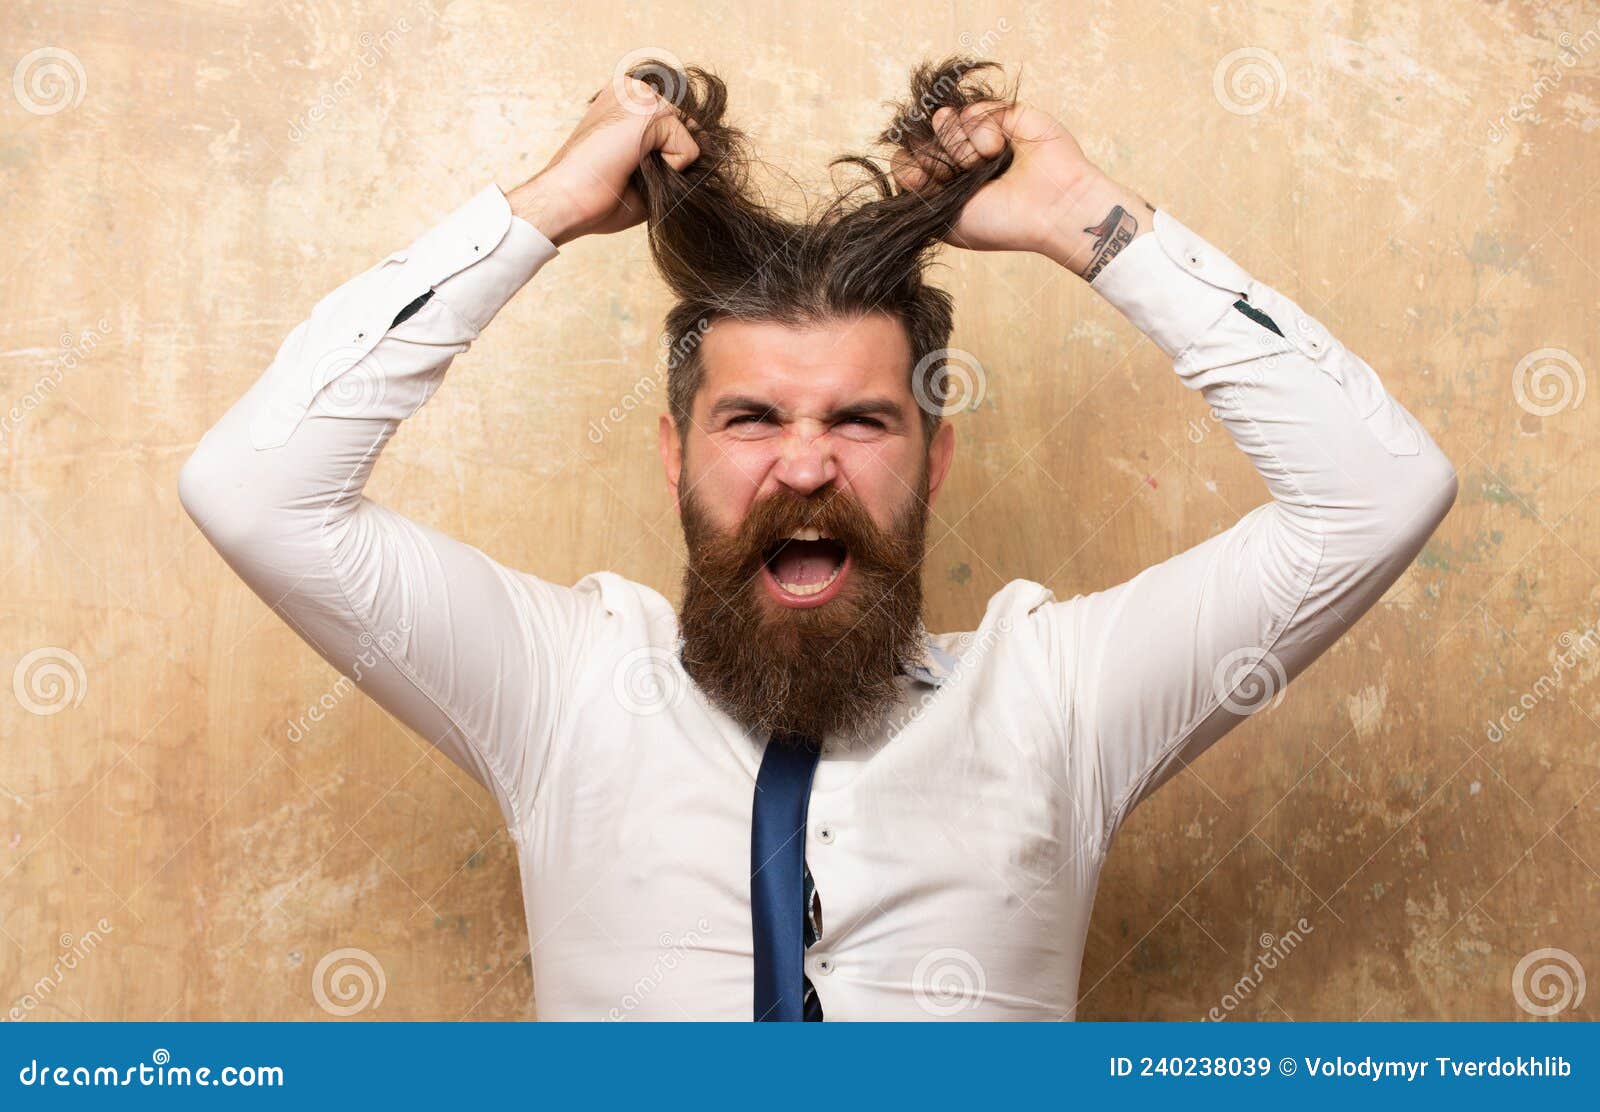 Funny Hairstyle, Modern Haircut. Excited Bearded Man with Beard, Bearded  Gay. Barbershop Concept. Angry Men. Stock Image - Image of concept,  excited: 240238039